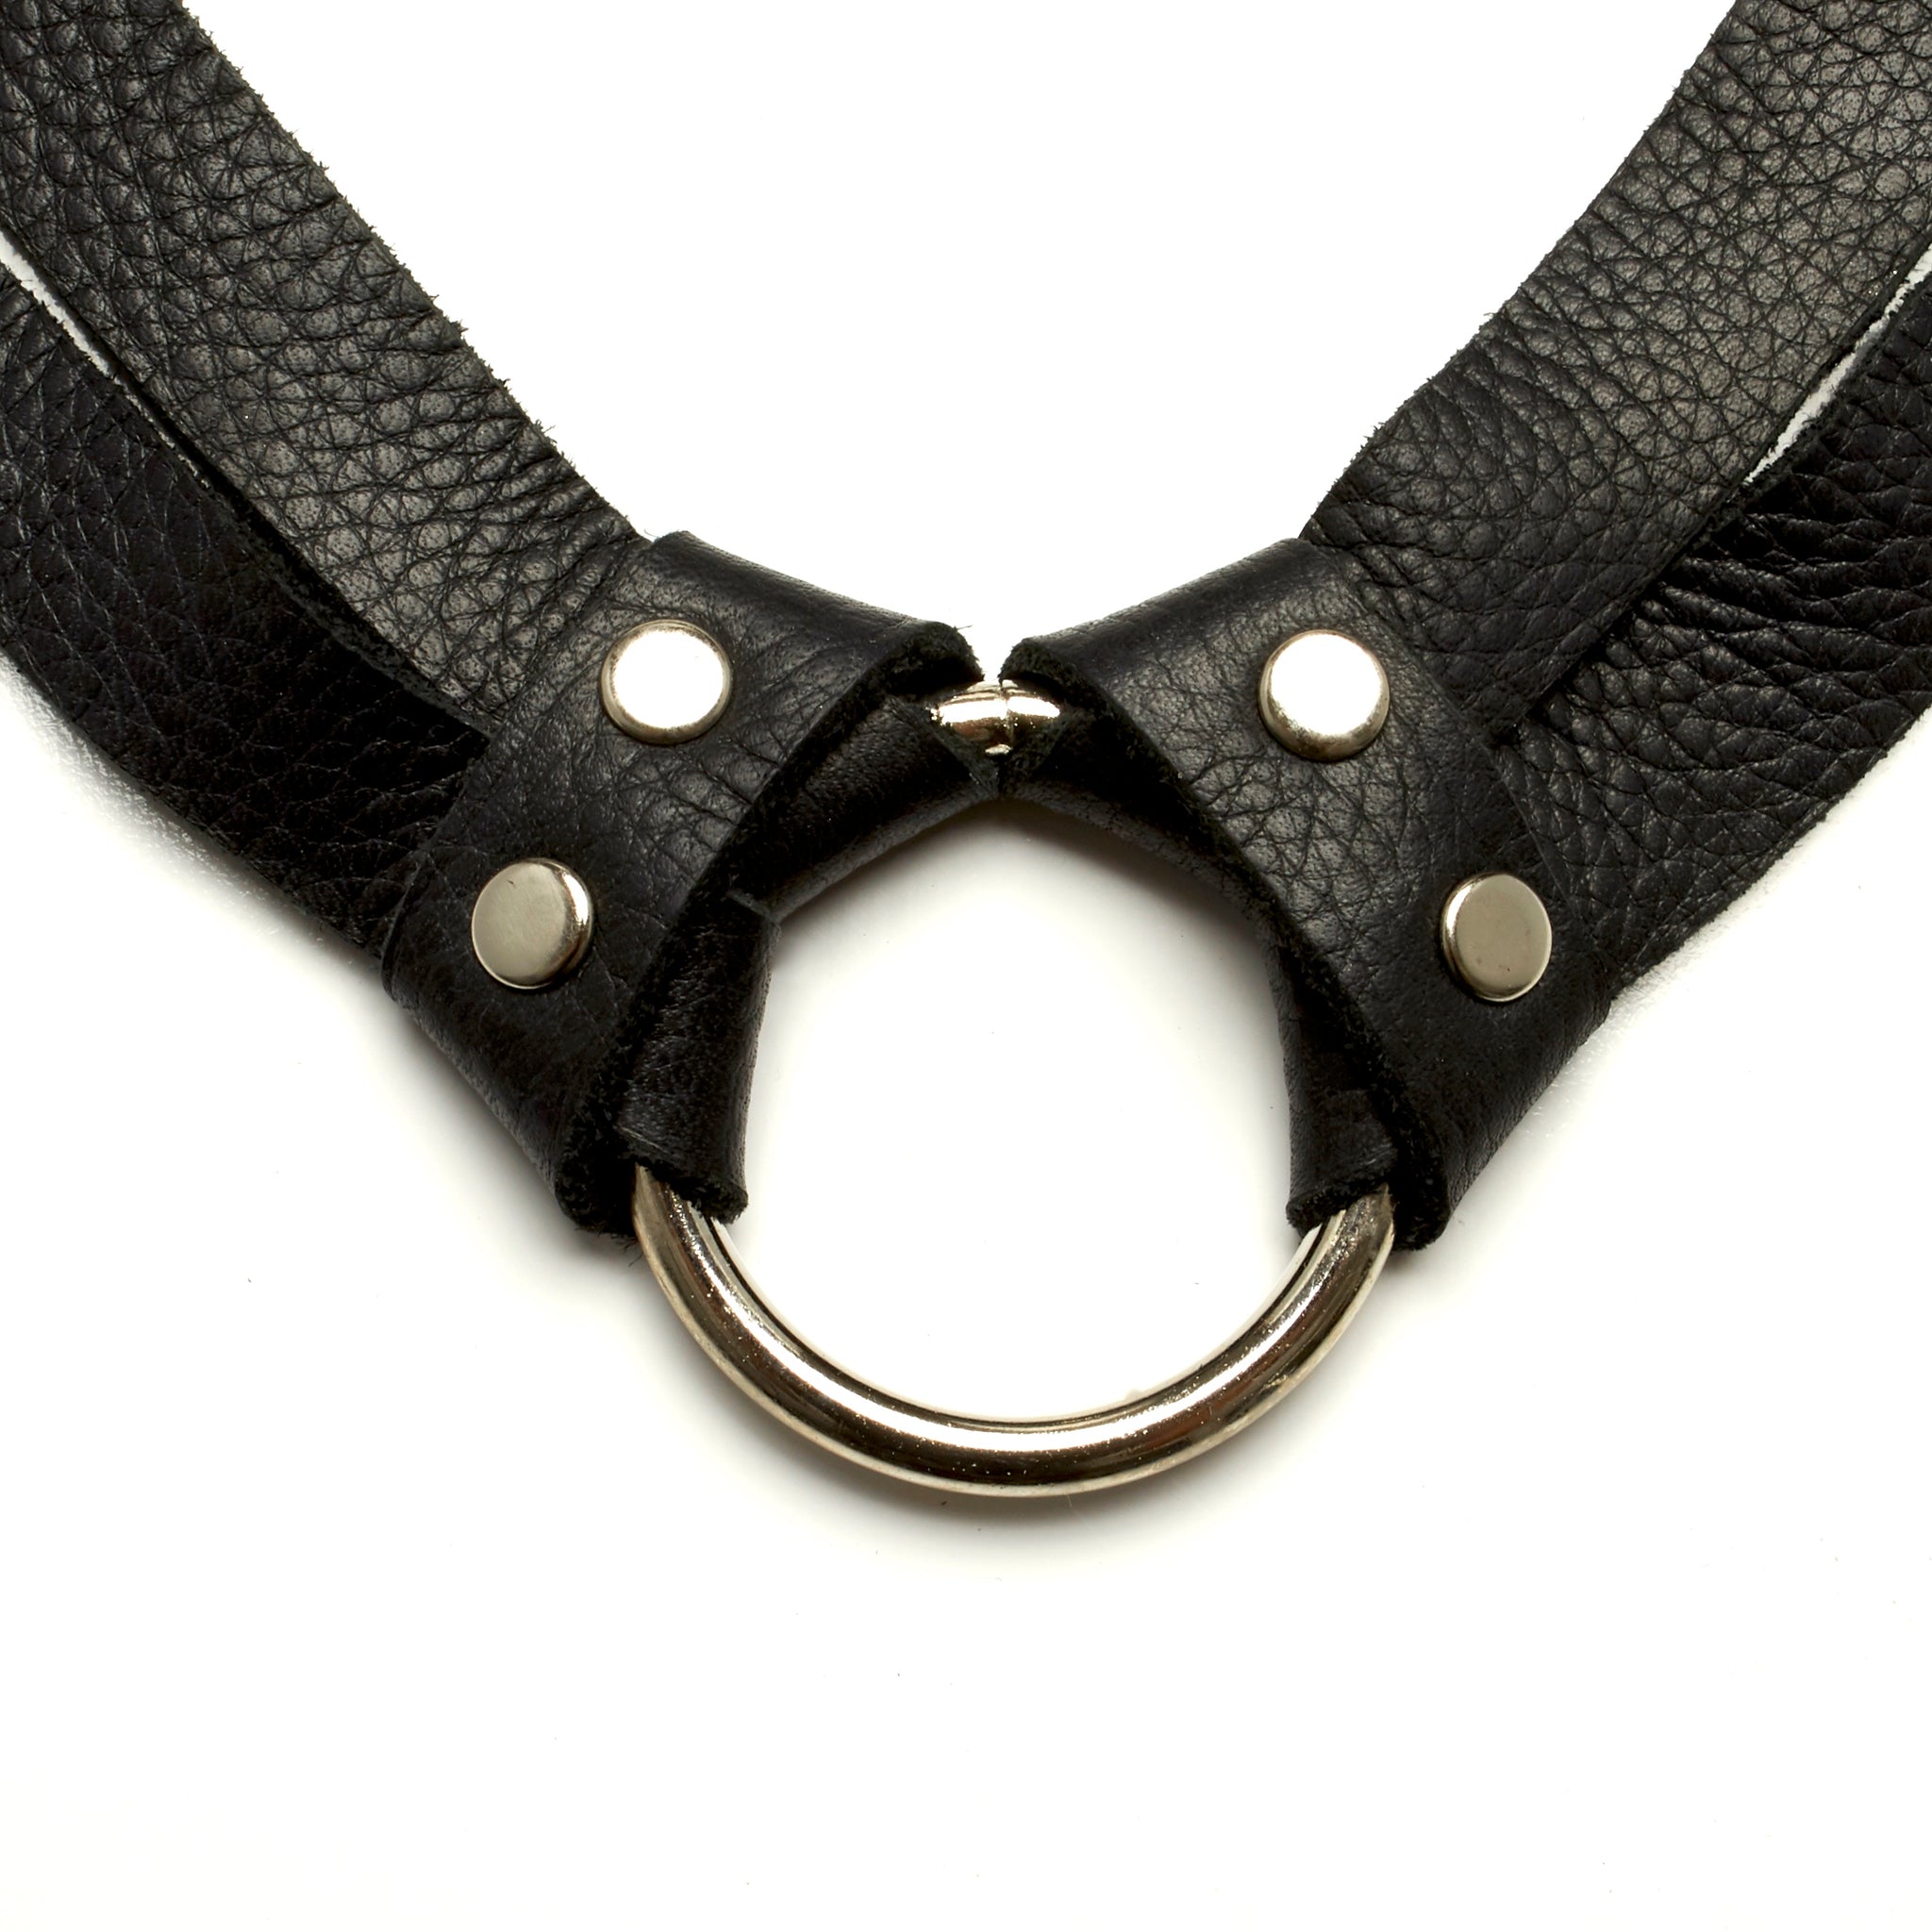 TWO STRAND DEERSKIN LEATHER CHOKER NECKLACE WITH STAINLESS STEEL RING.  BY NYET JEWELRY